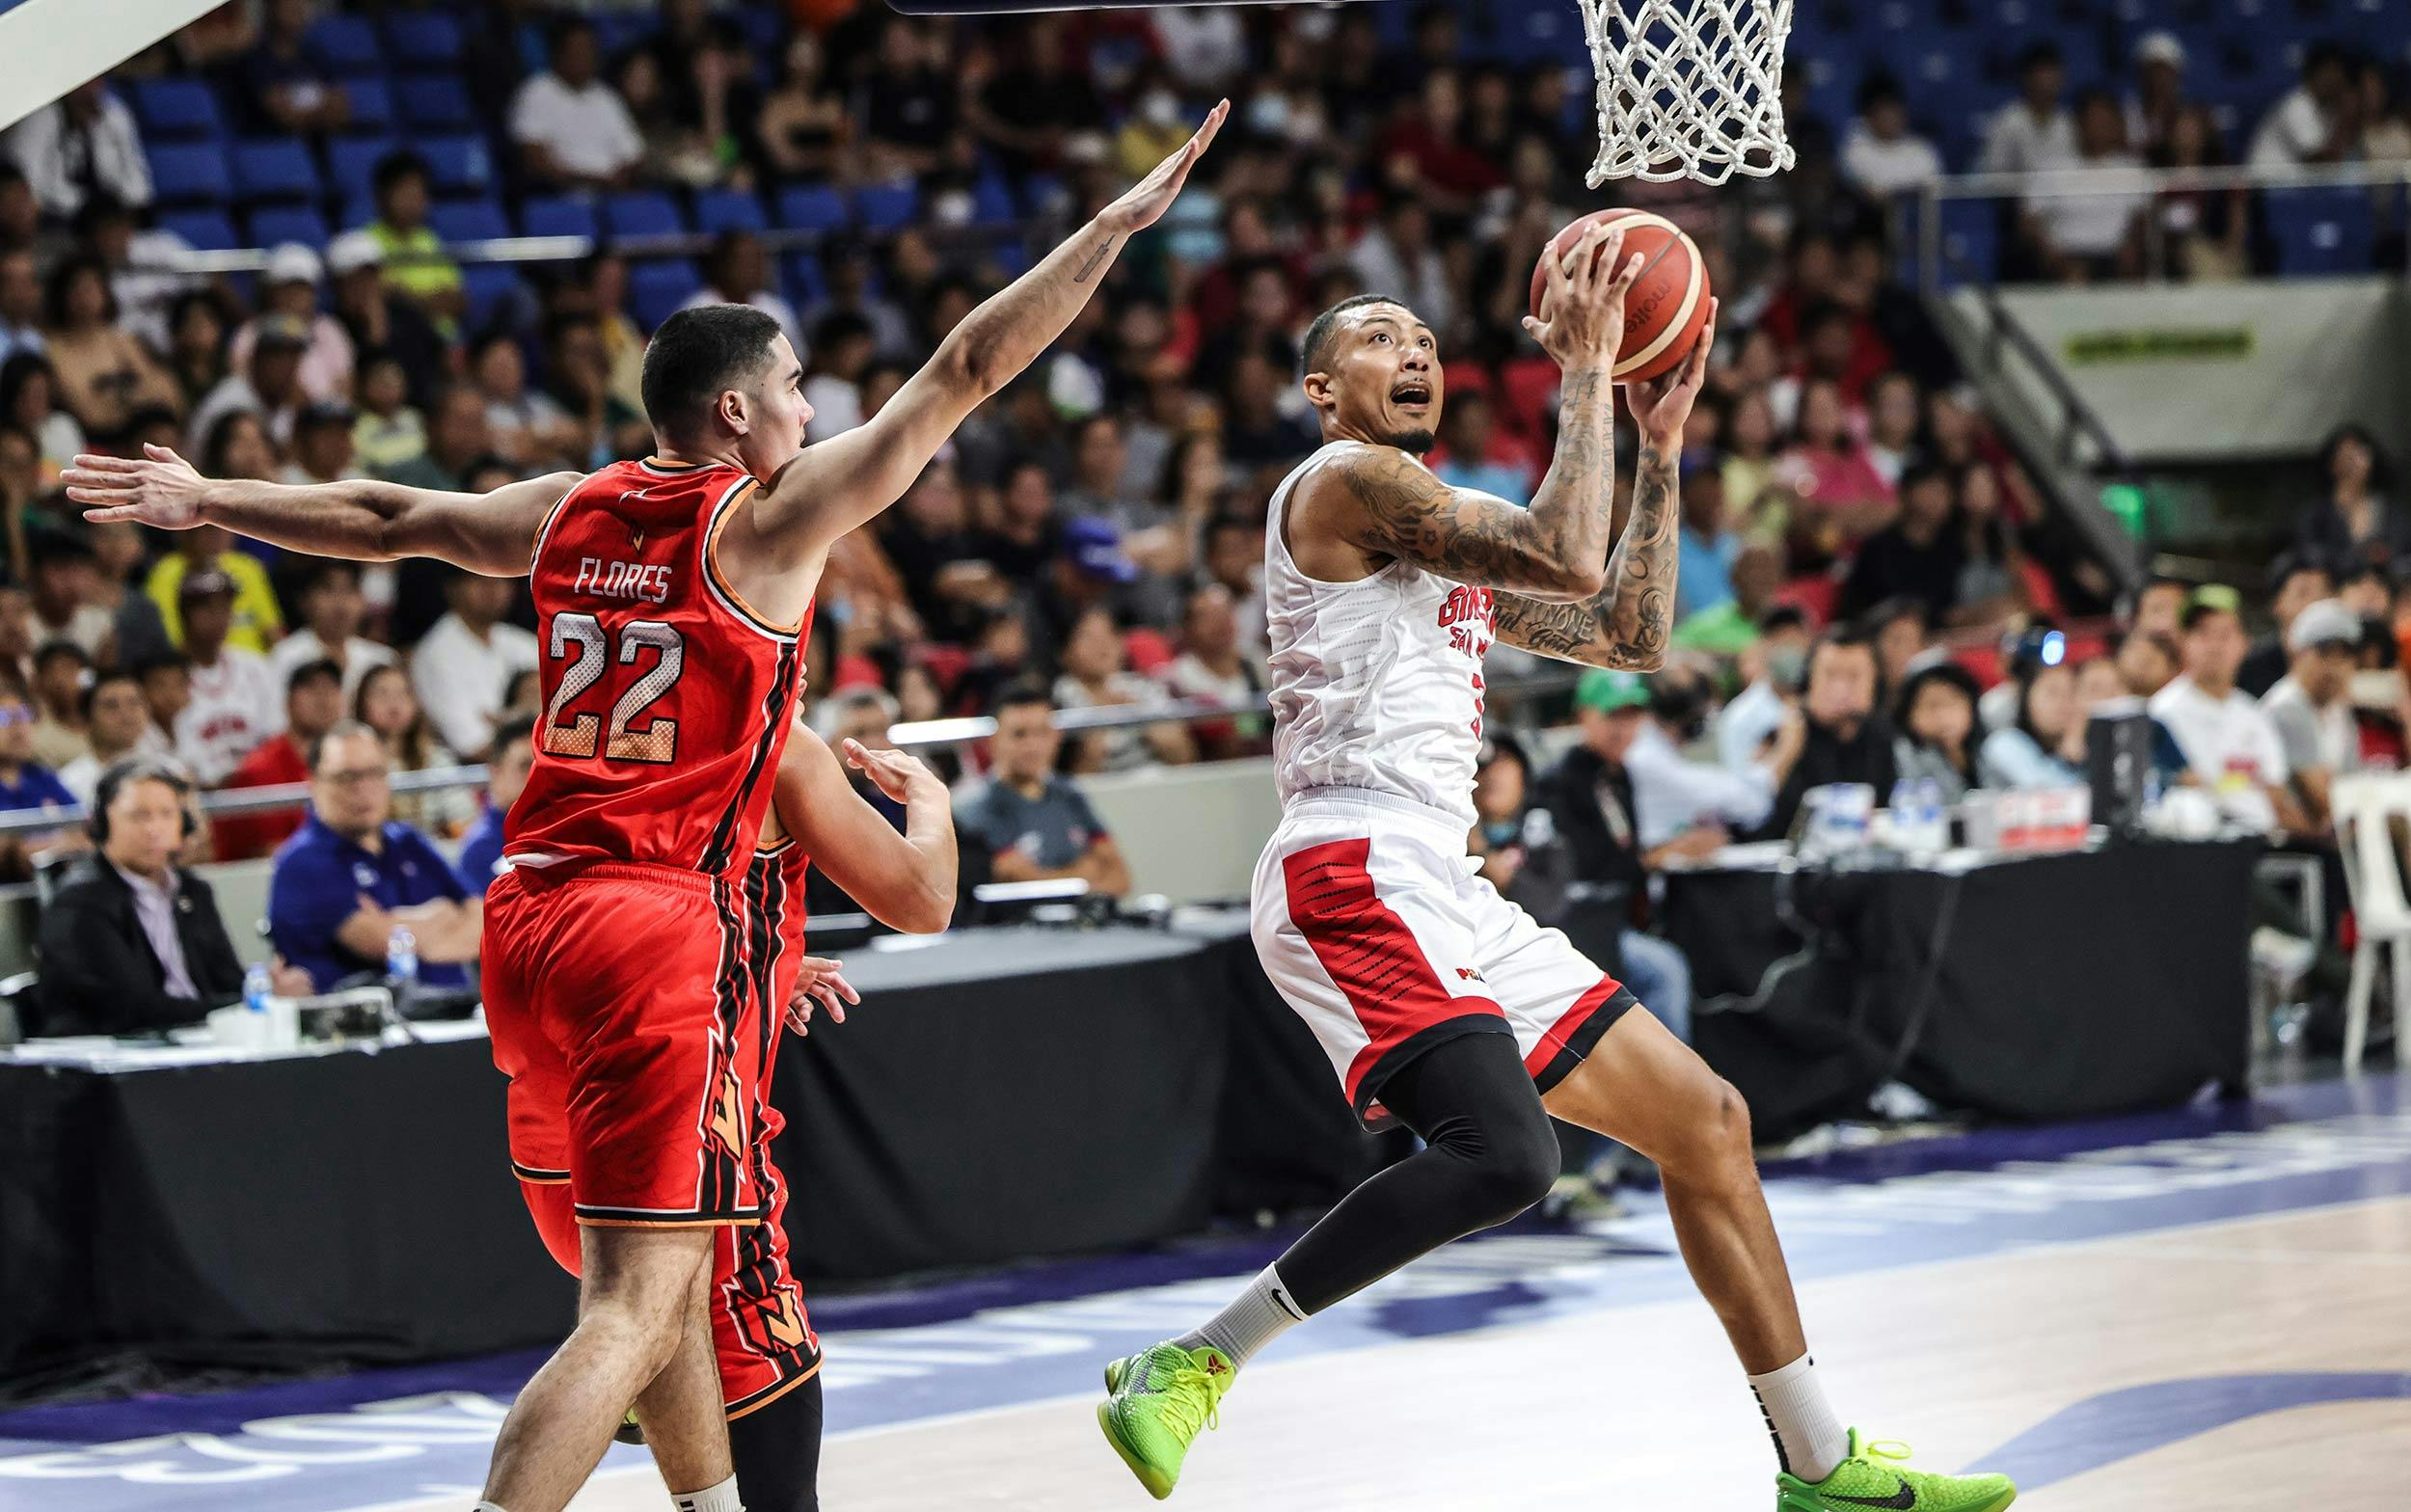 PBA: Jamie Malonzo gives update on injury, shows support for Ginebra in Game 6